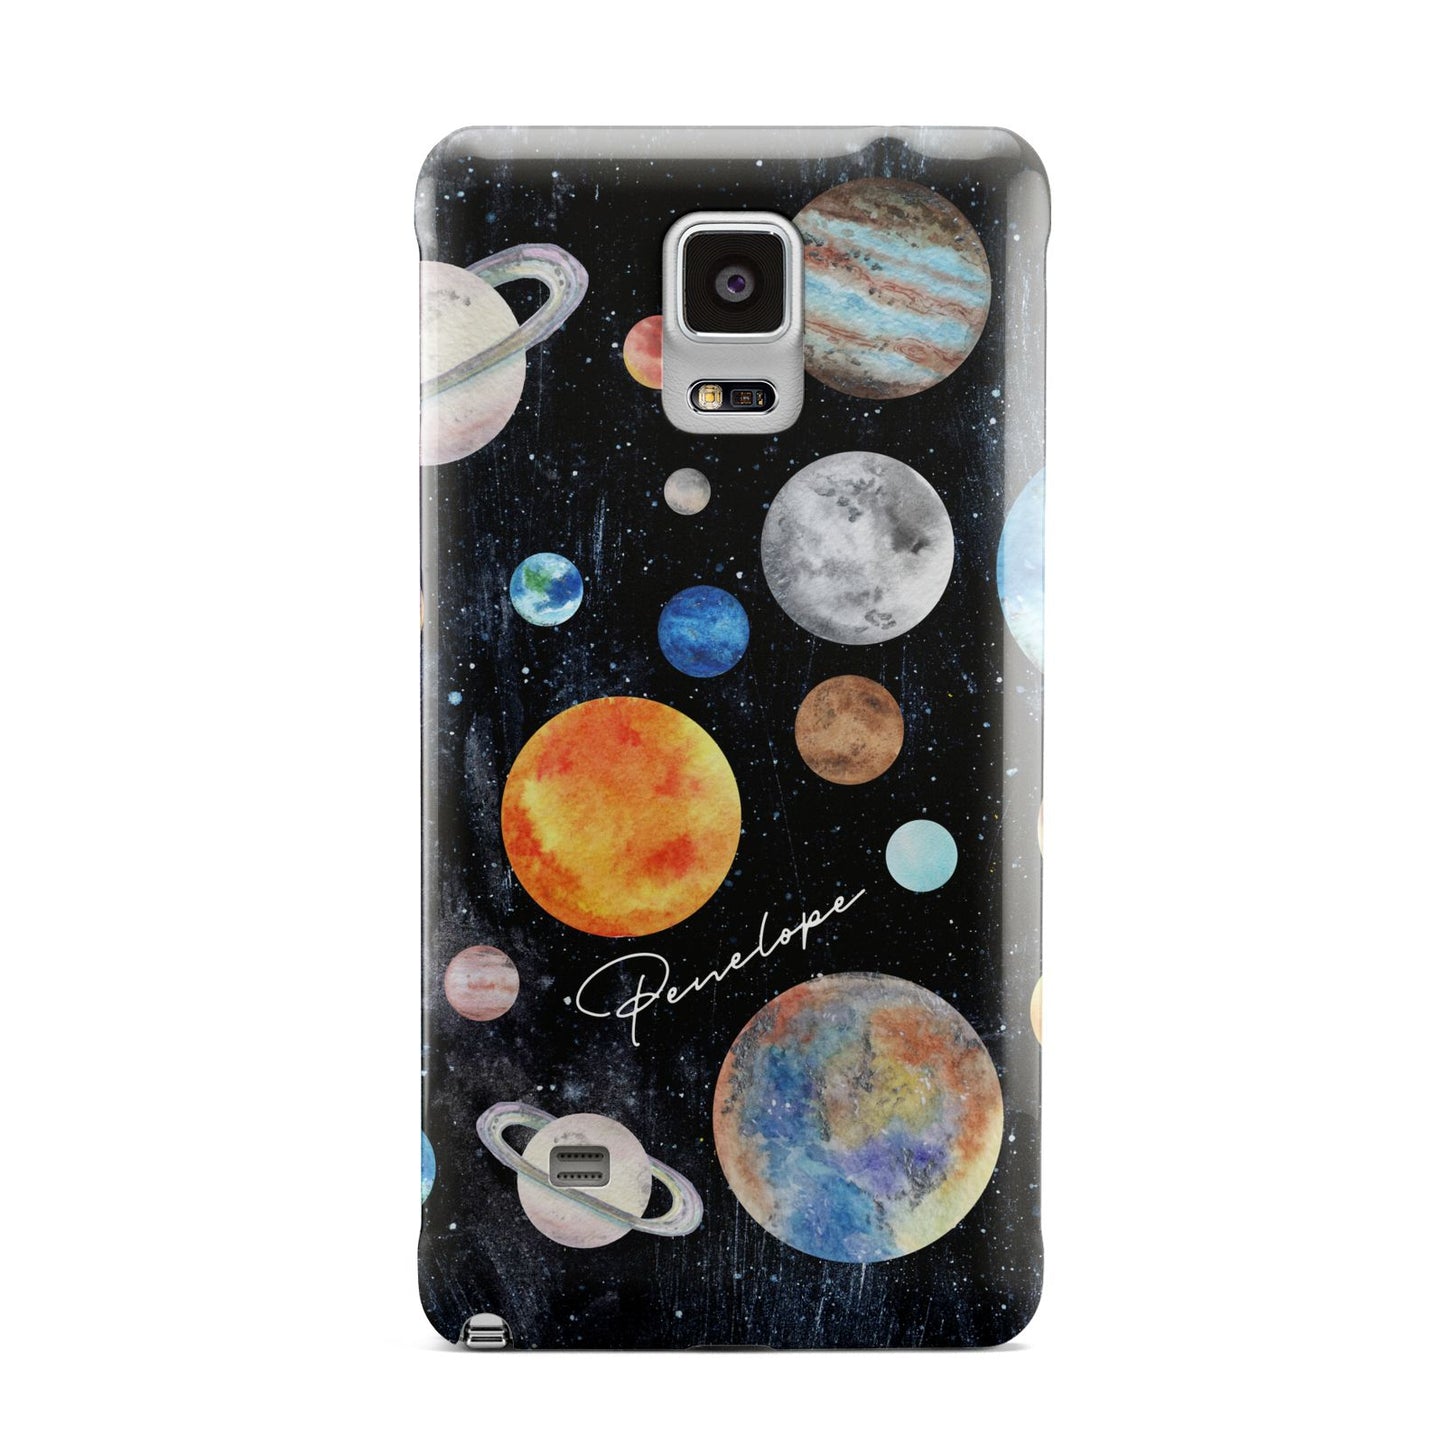 Personalised Planets Samsung Galaxy Note 4 Case